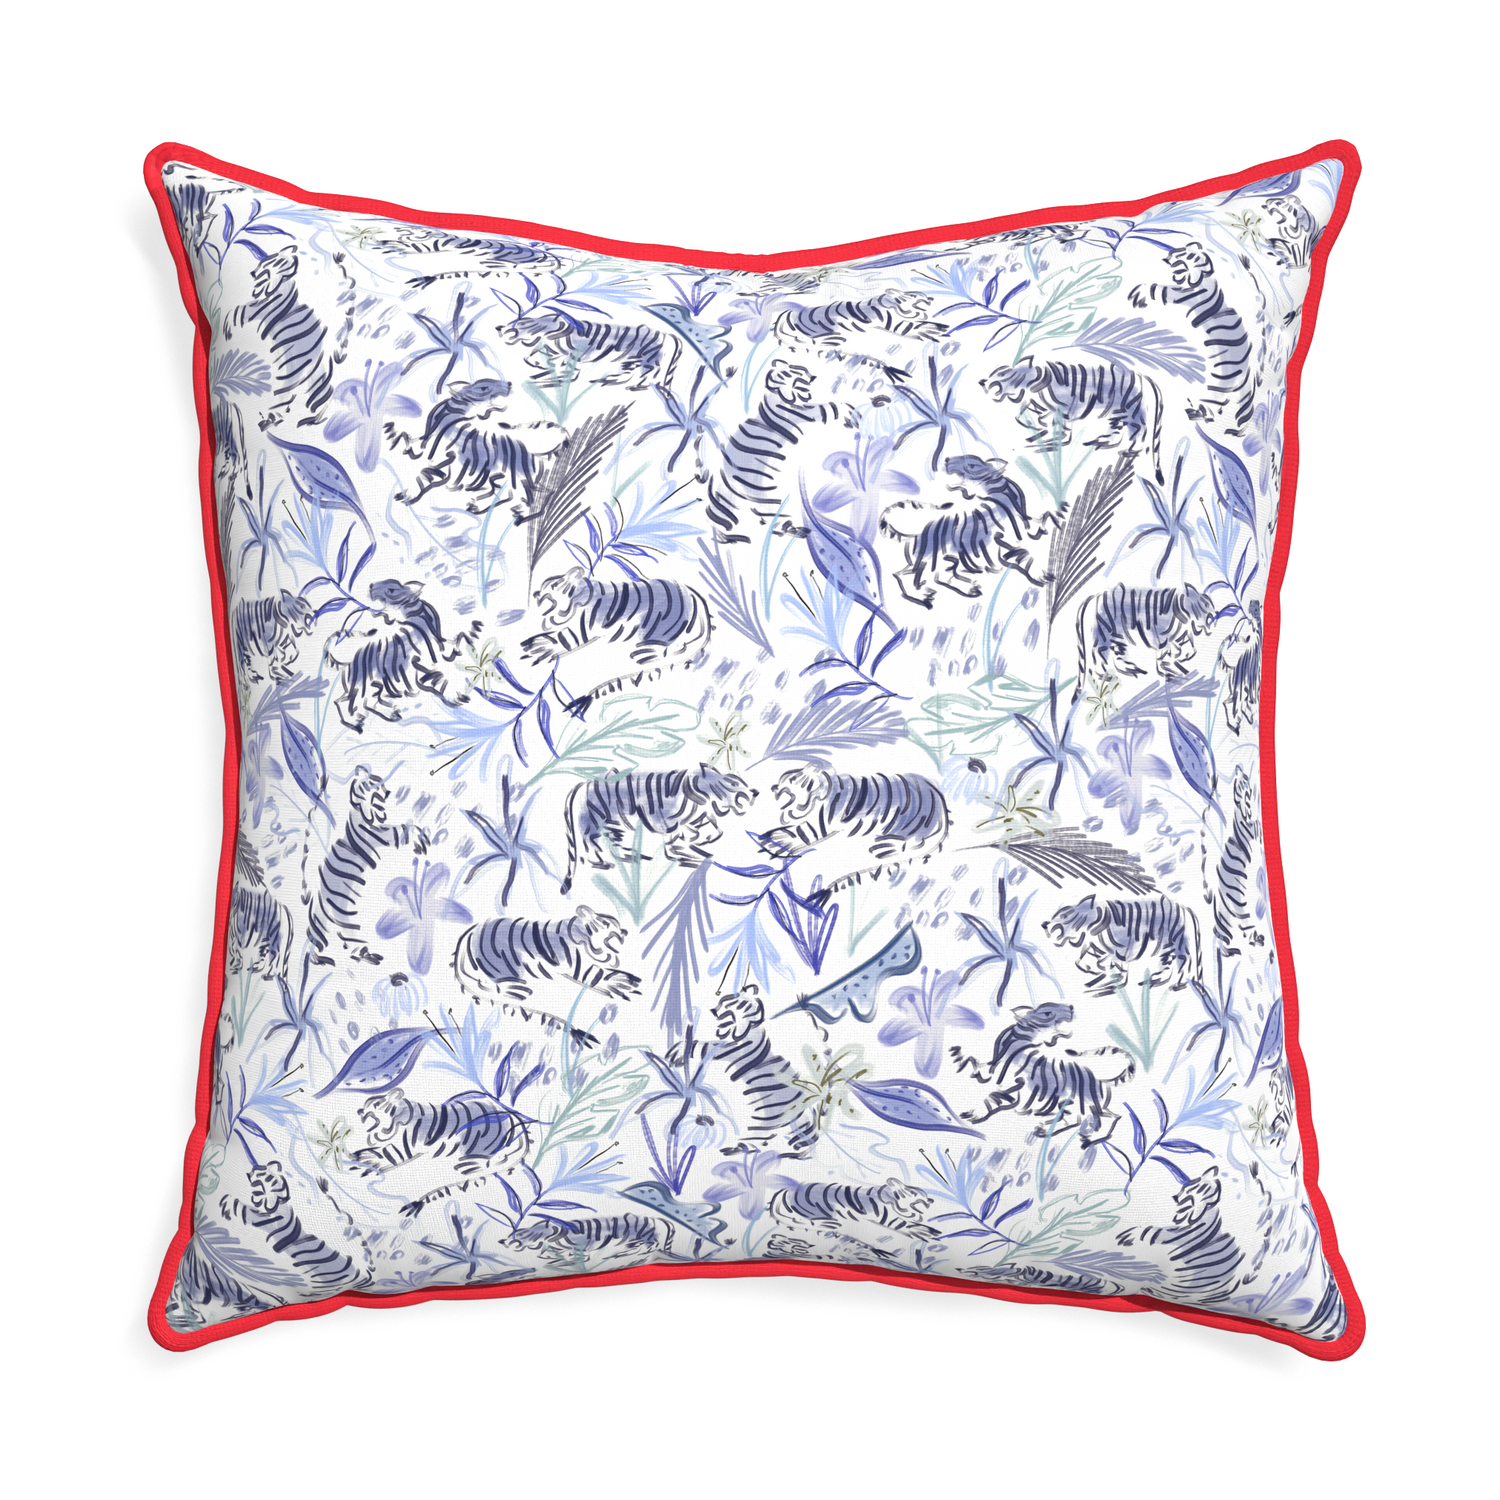 Euro-sham frida blue custom blue with intricate tiger designpillow with cherry piping on white background